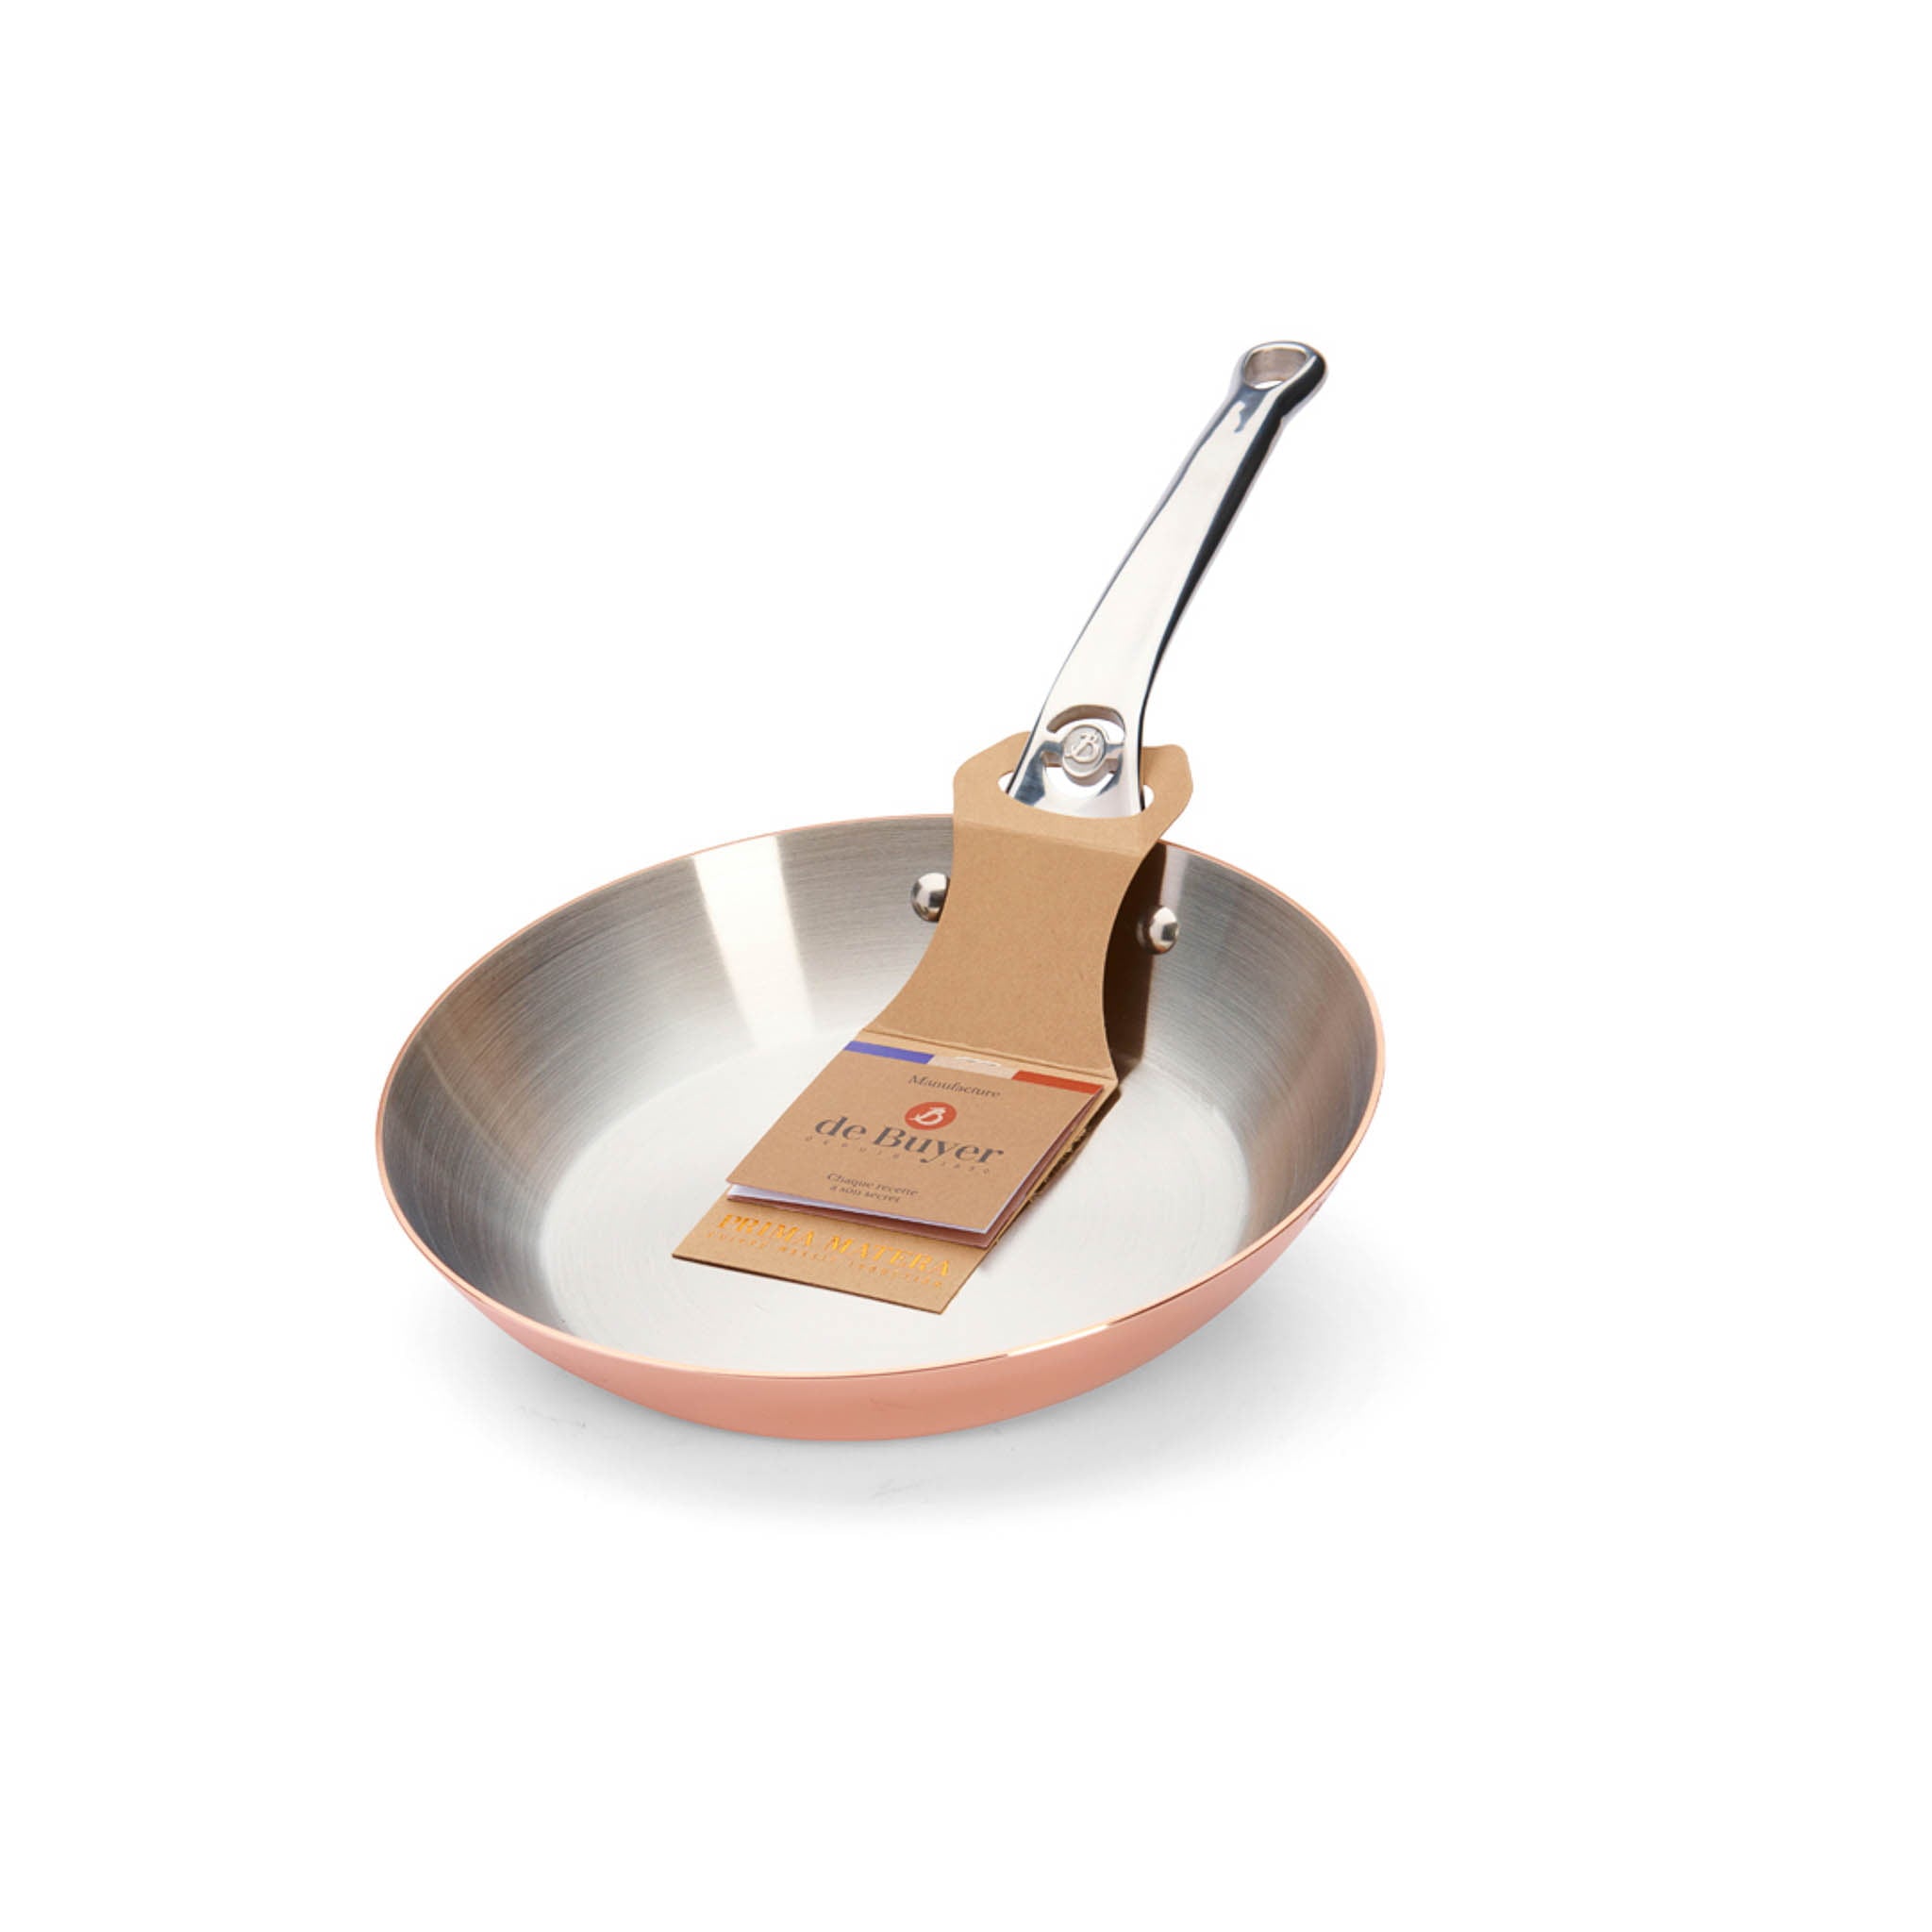 De Buyer Prima Matera Induction Copper Frying Pan with Stainless Steel Handle